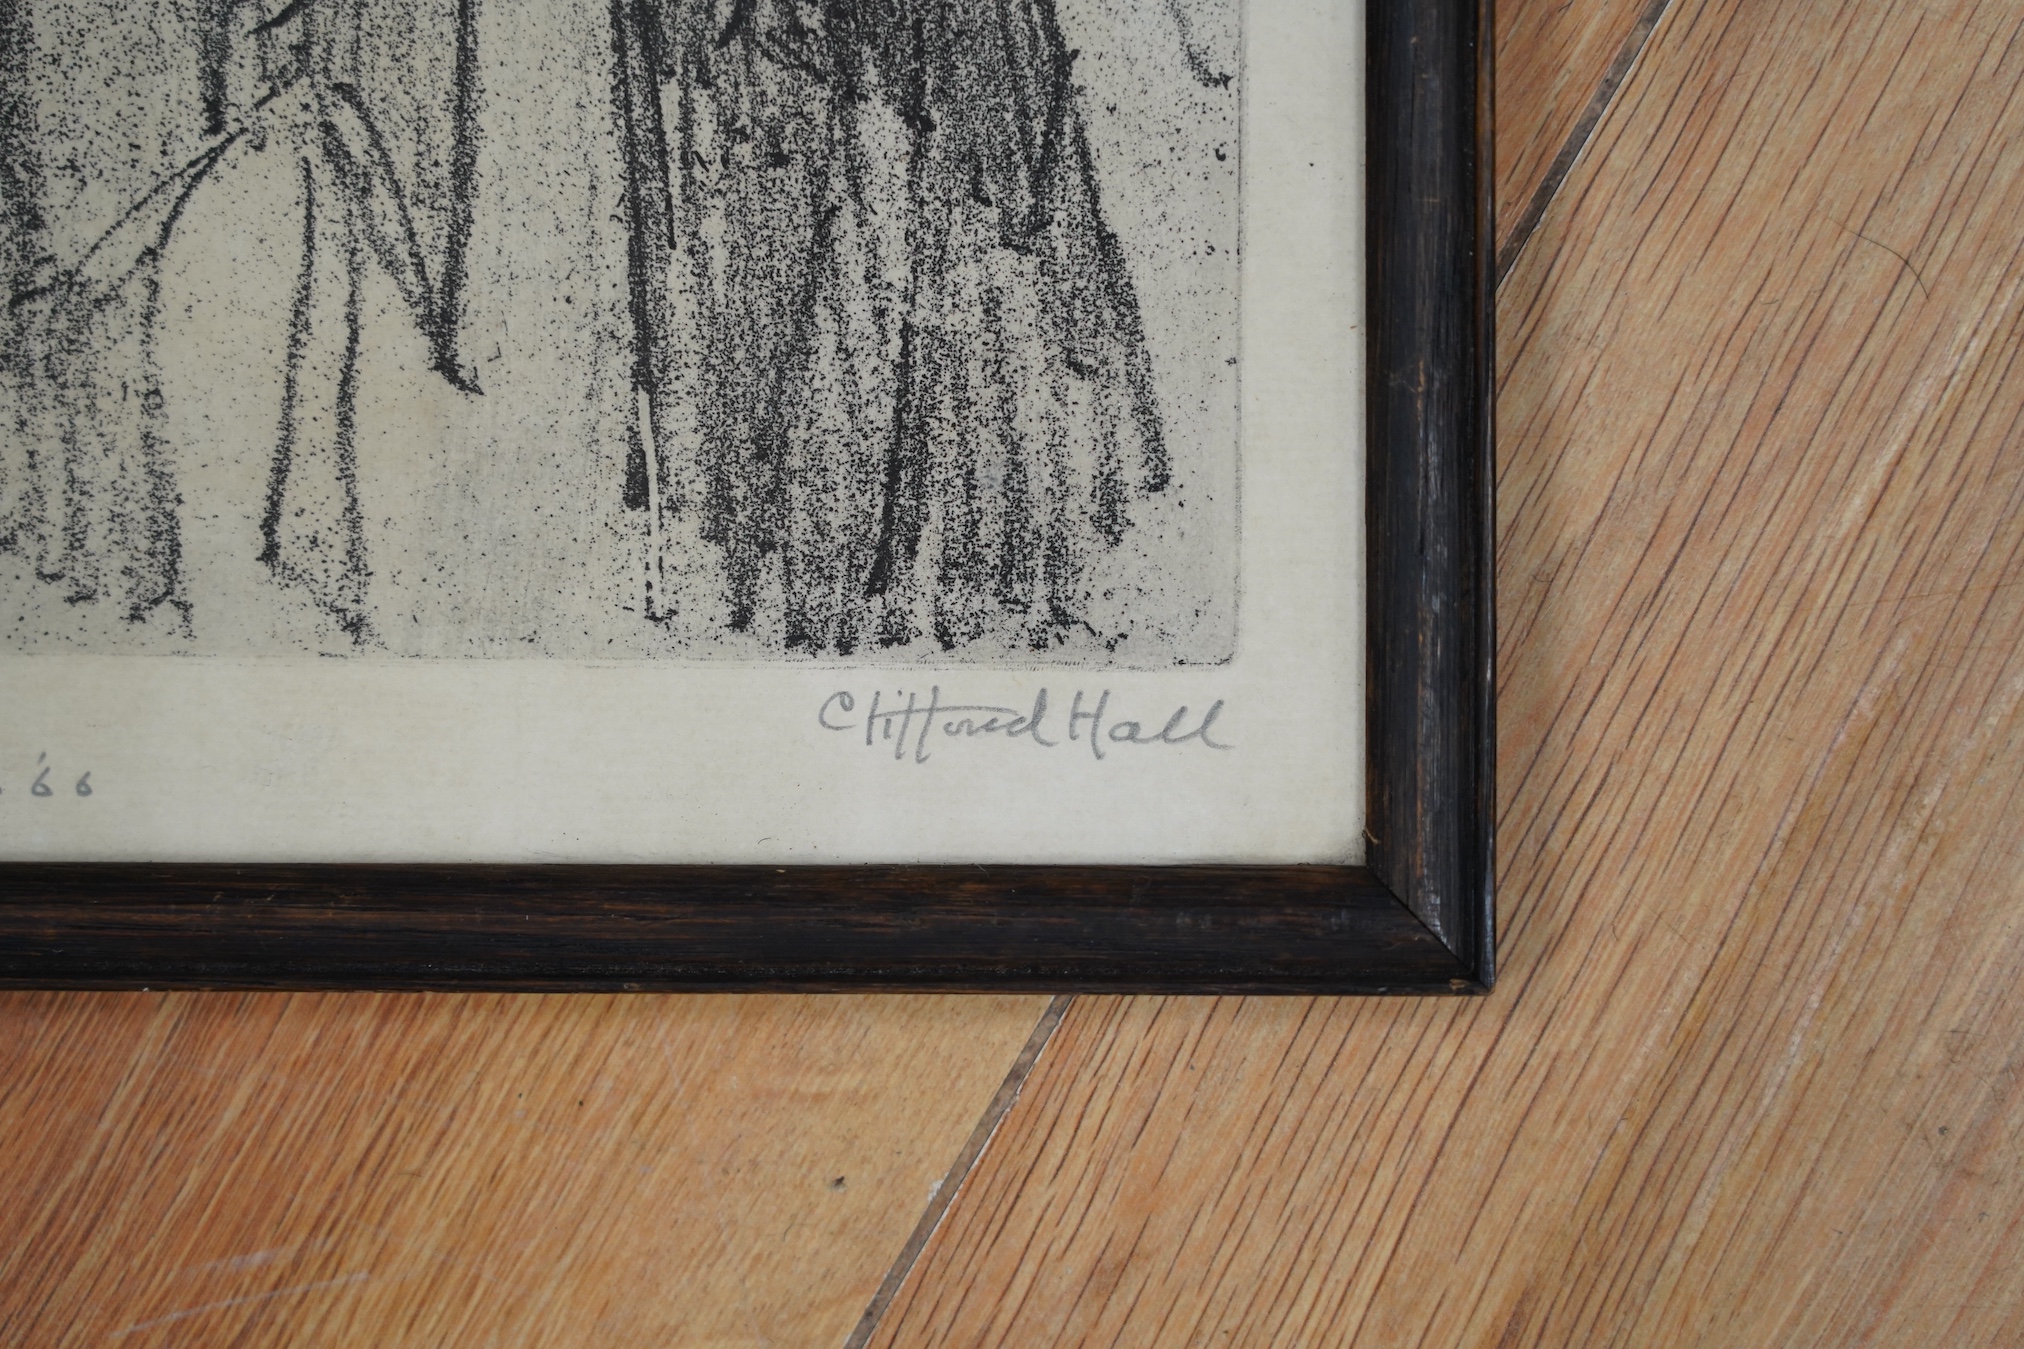 Clifford Hall (1904-1973), etching, Study of a clown 'Fred Boston', signed, inscribed and dated '66, 38 x 22cm. Condition - good